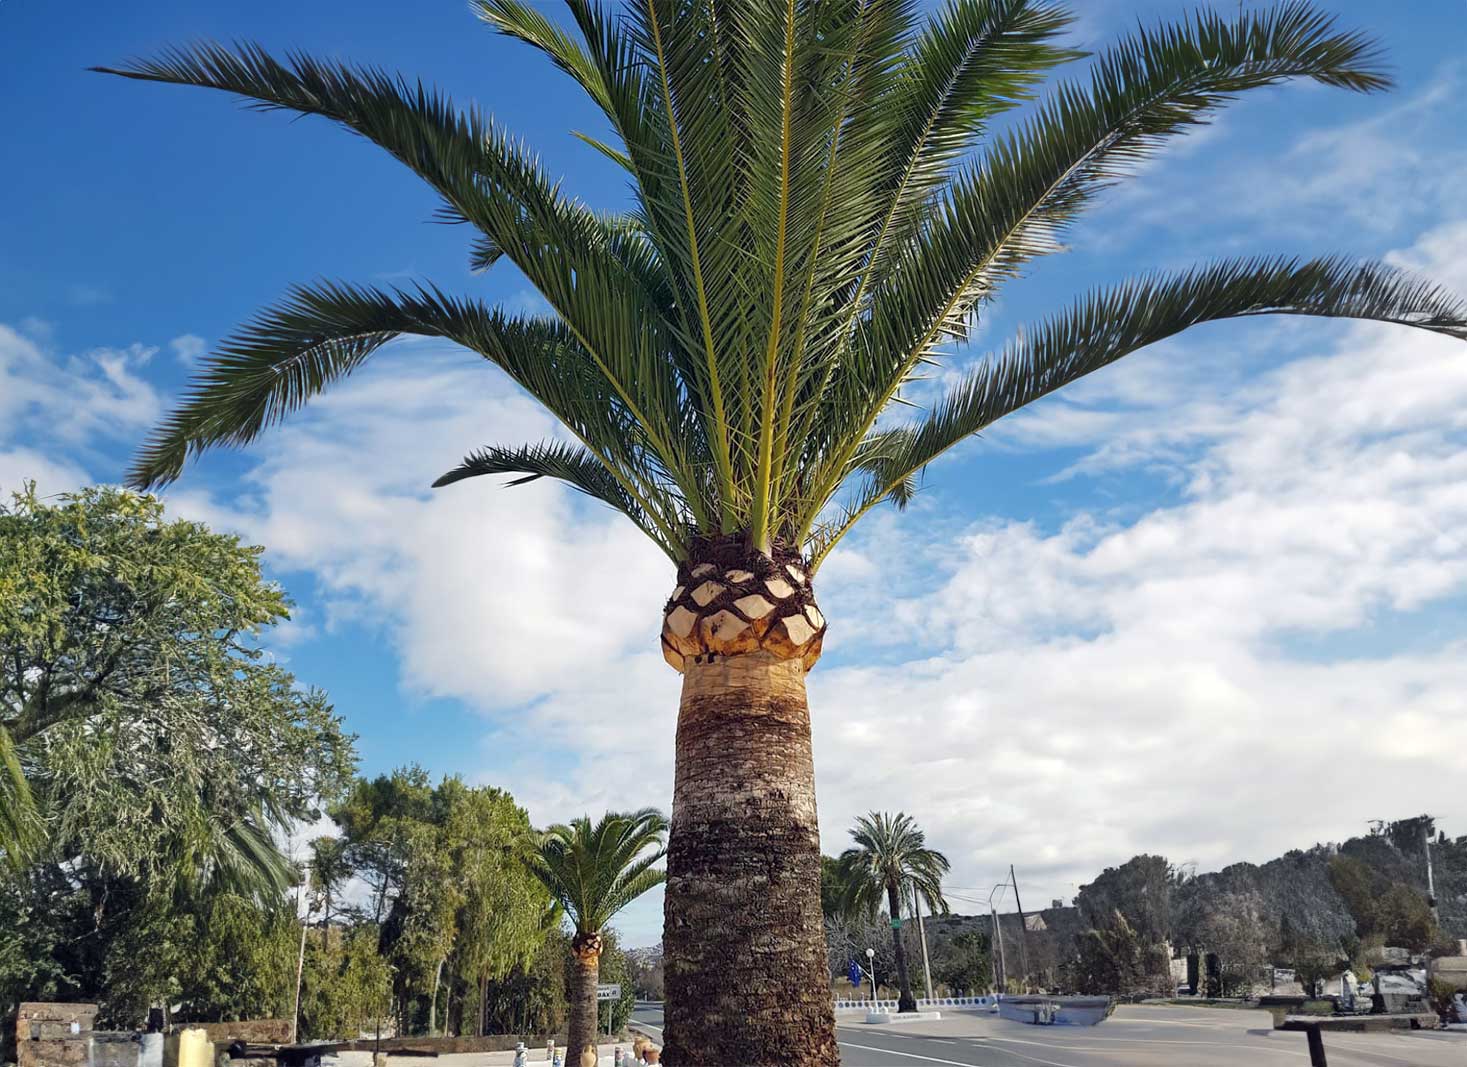 Factors Affecting Palm Tree Trimming Costs in Phoenix